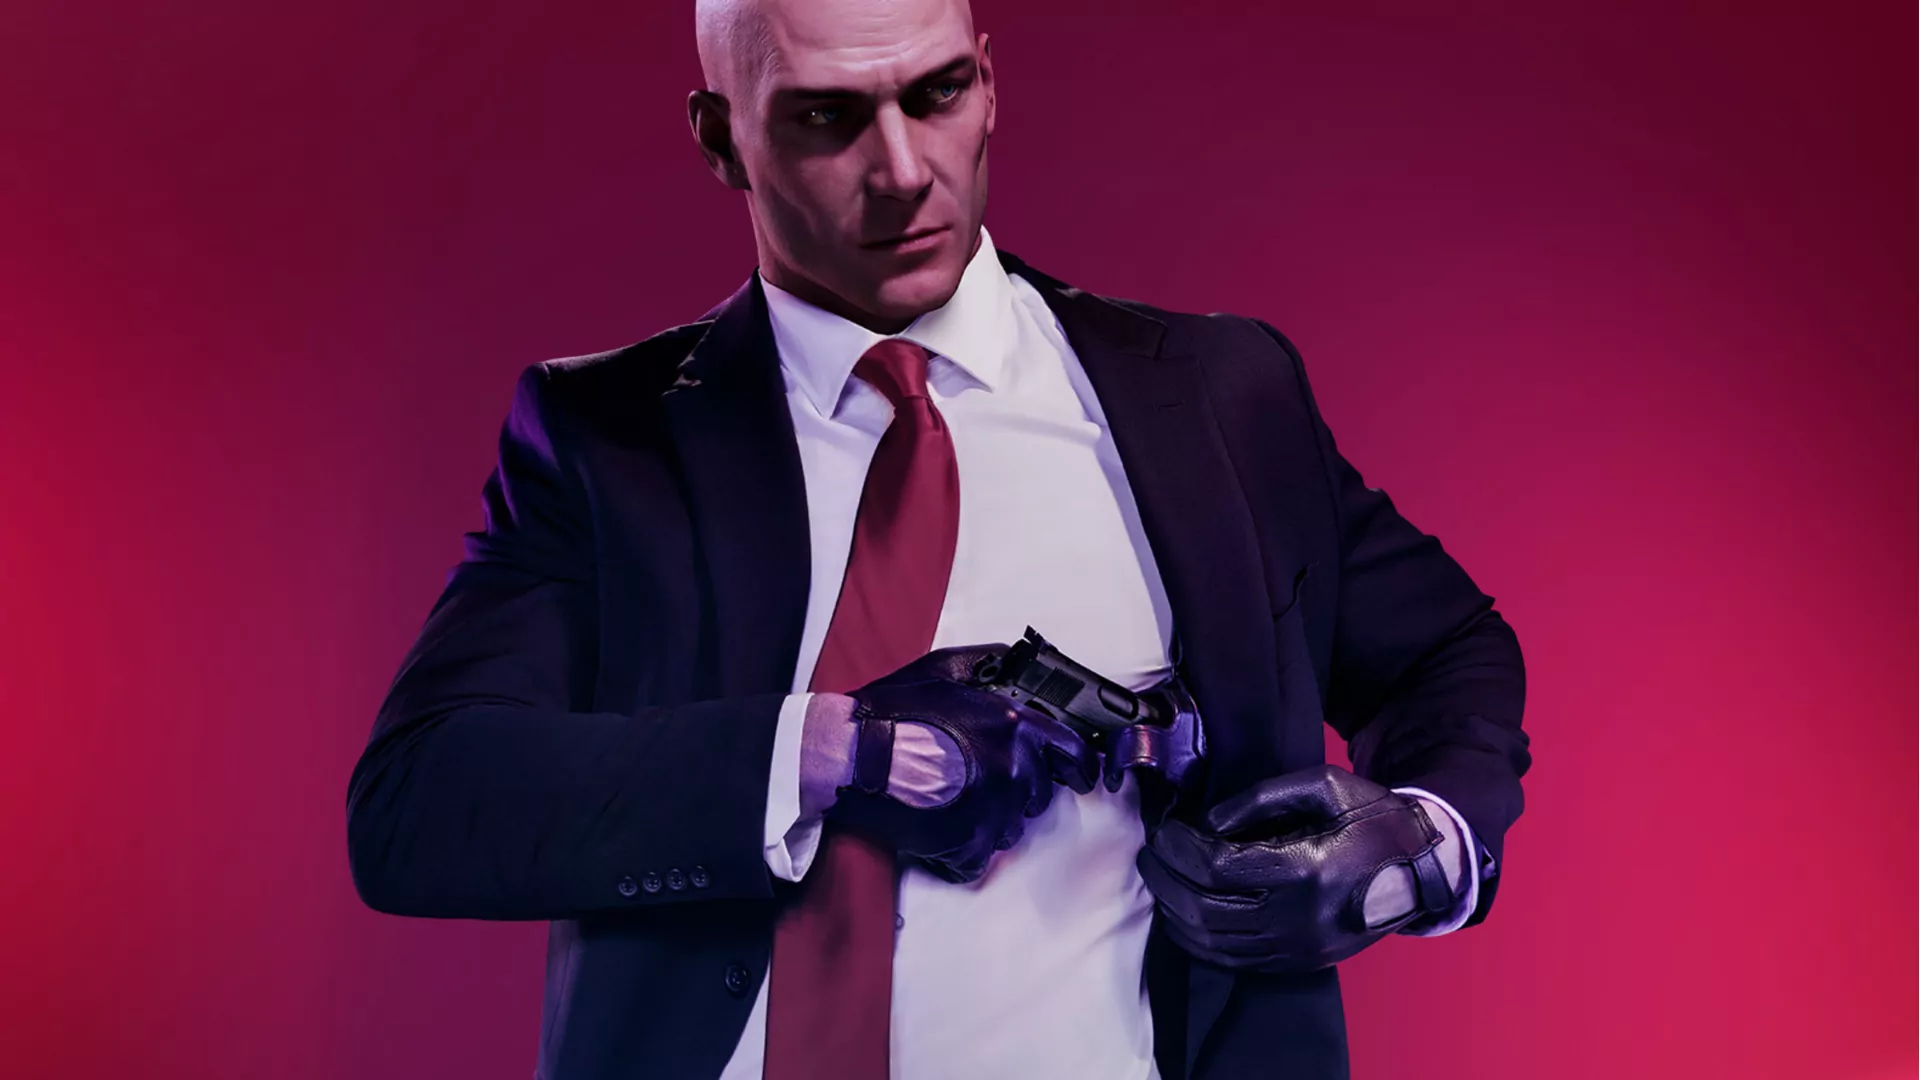 ‘HITMAN: AGENT 47’ WATCH AND DOWNLOAD FREE! 